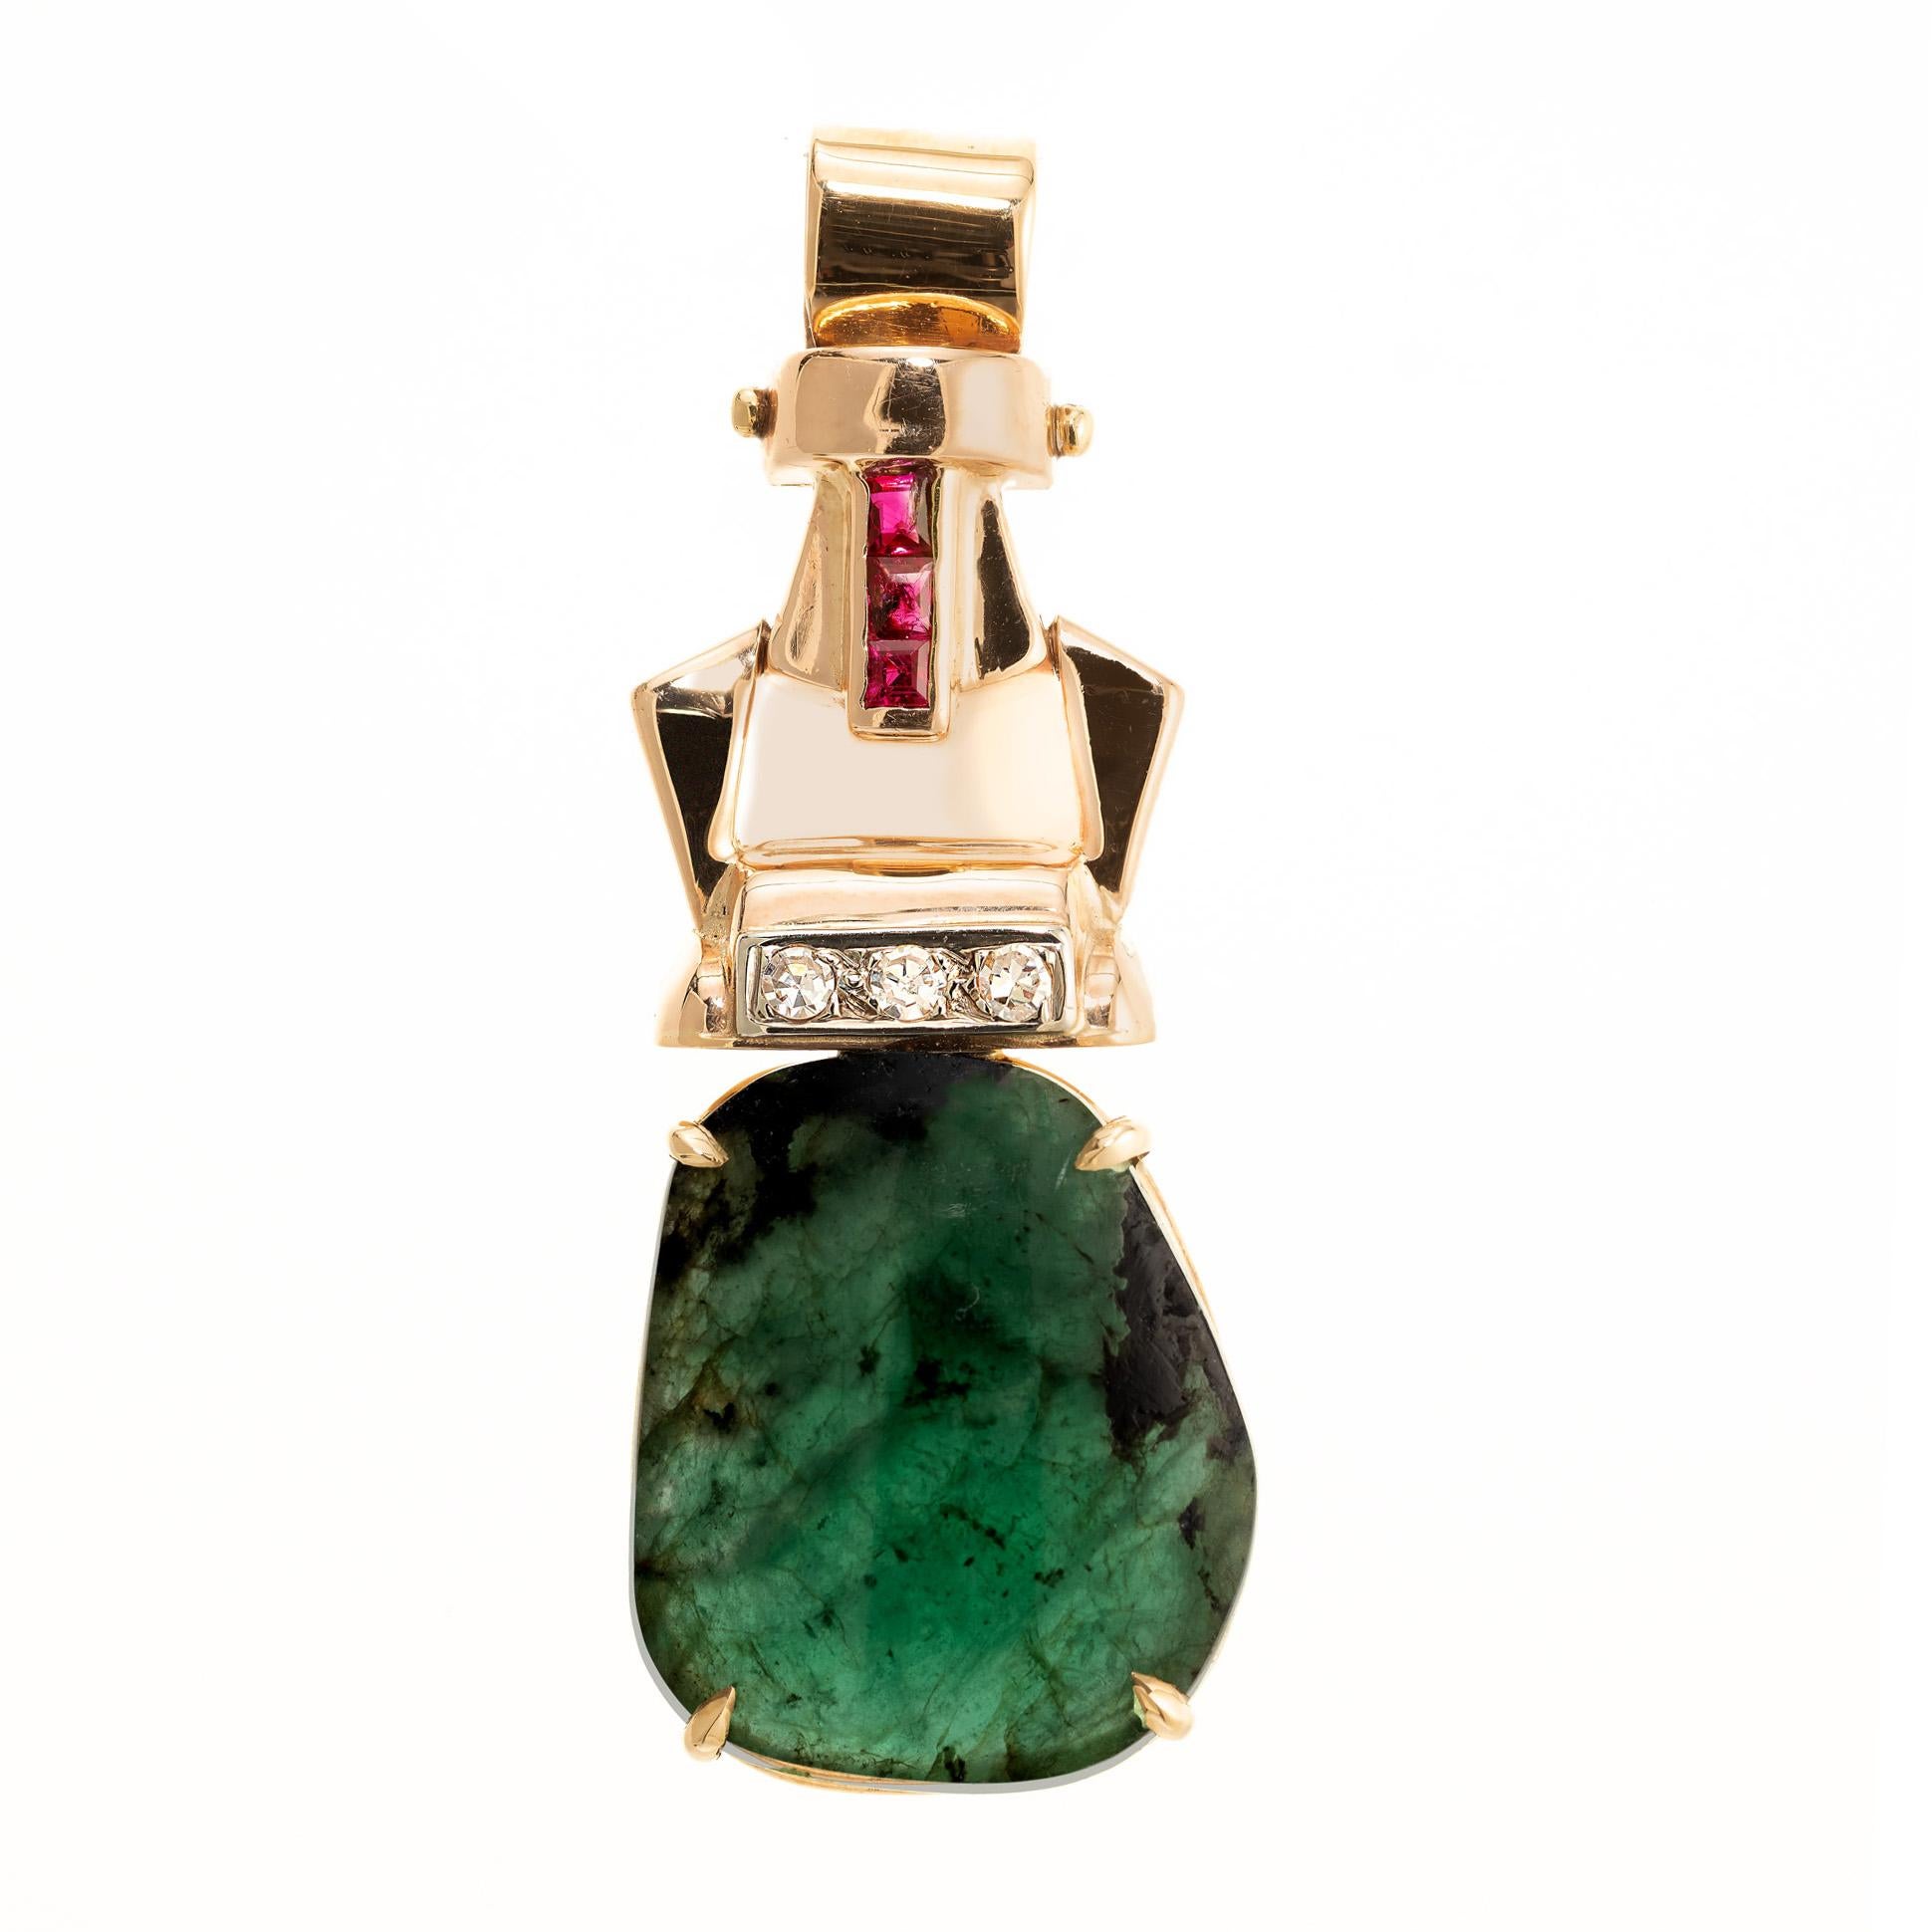 Art Deco Retro 1940's Emerald diamond and ruby pendant. Green natural emerald slice in 14k rose gold, with 3 single cut diamonds and 3 square cut rubies in a rose gold hinged bail.  

1 natural green Emerald crystal slice, approx. total weight